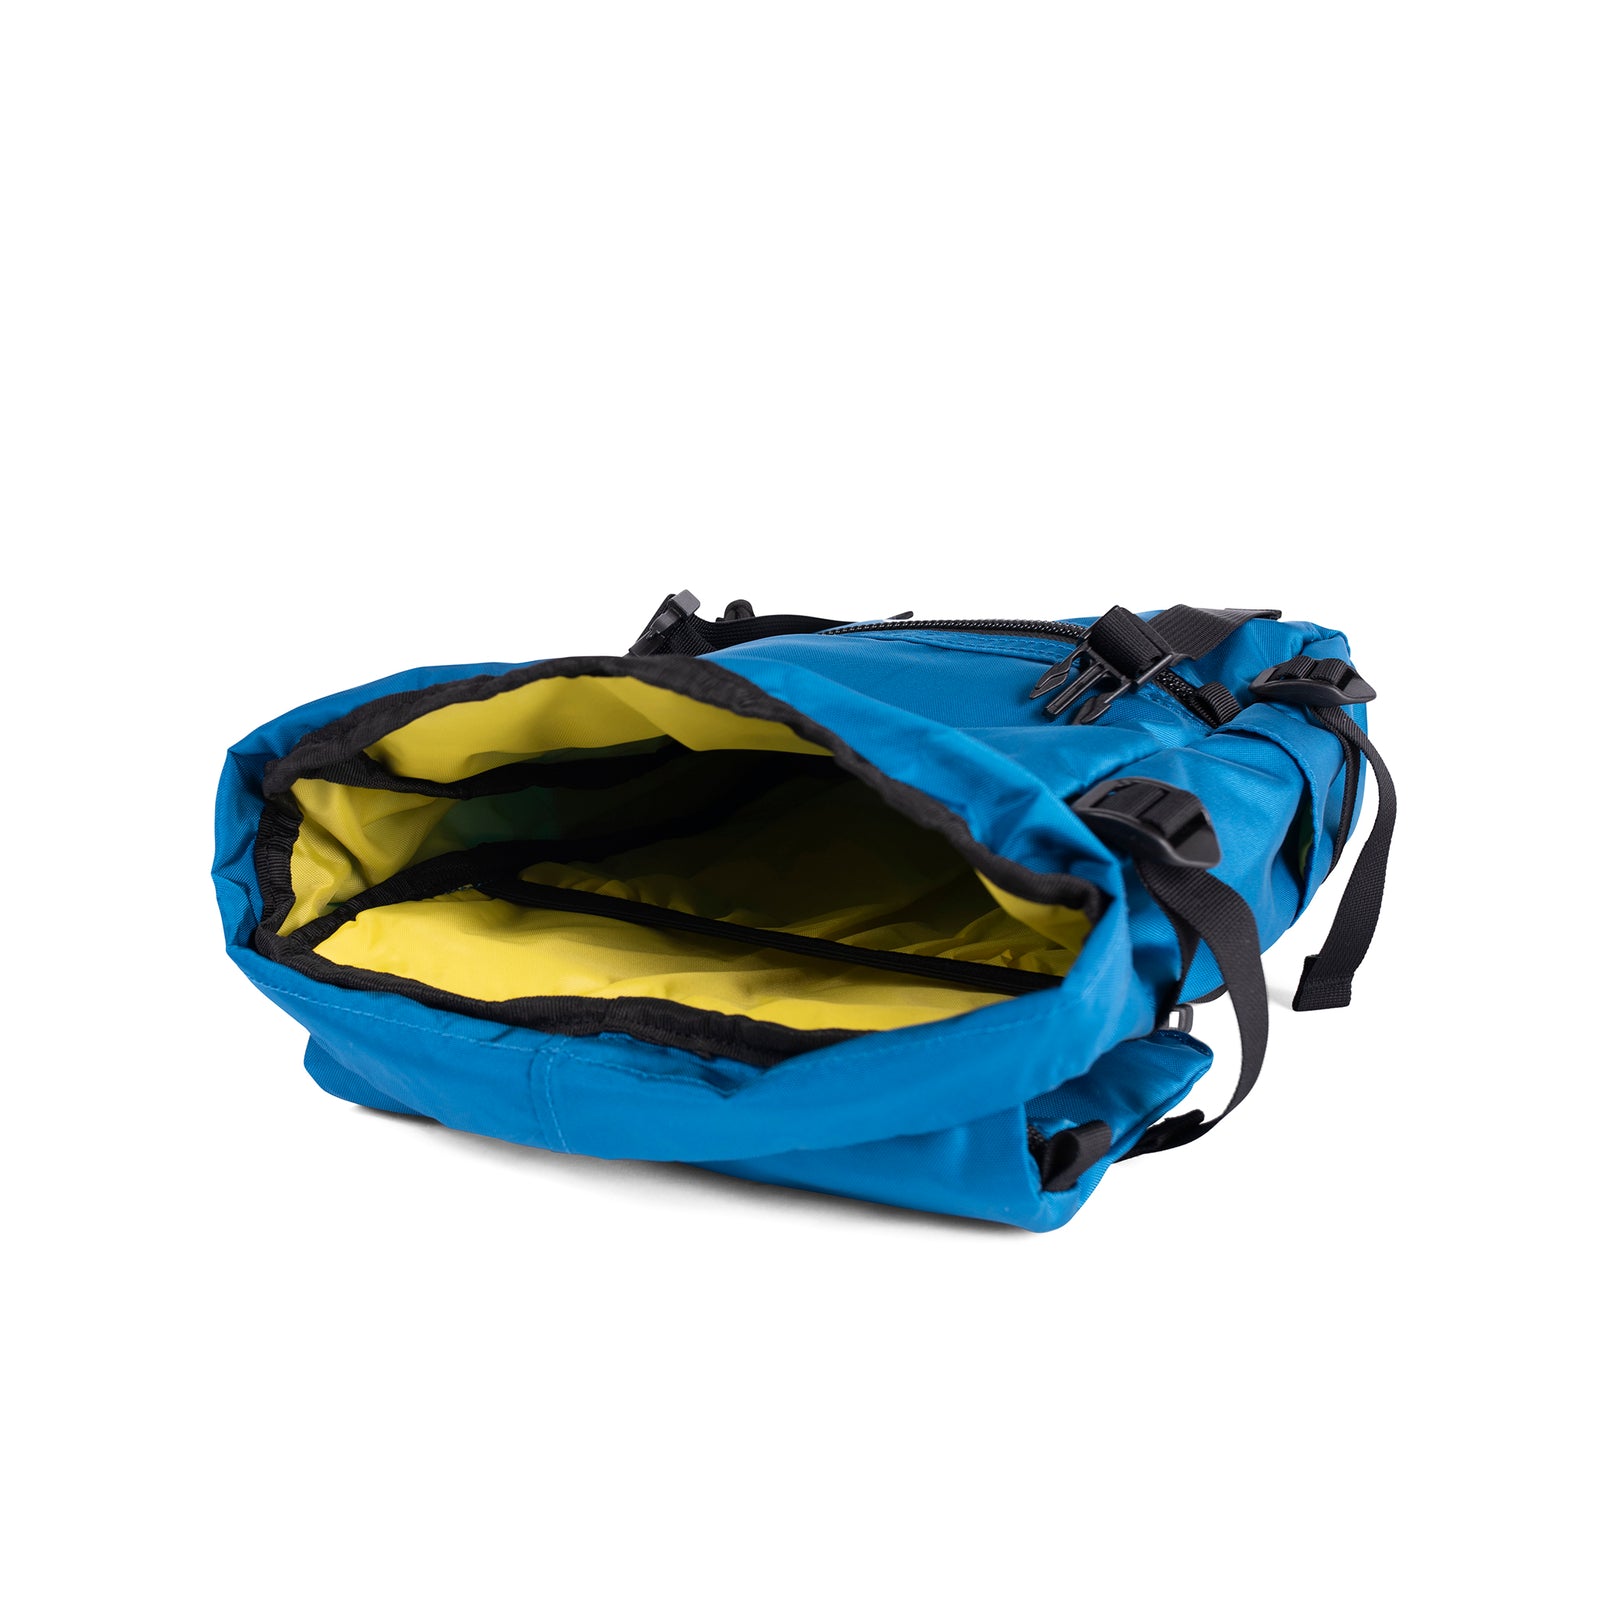 General detail shot of the Topo Designs Rover Pack Mini in Blue showing yellow inside of bag.